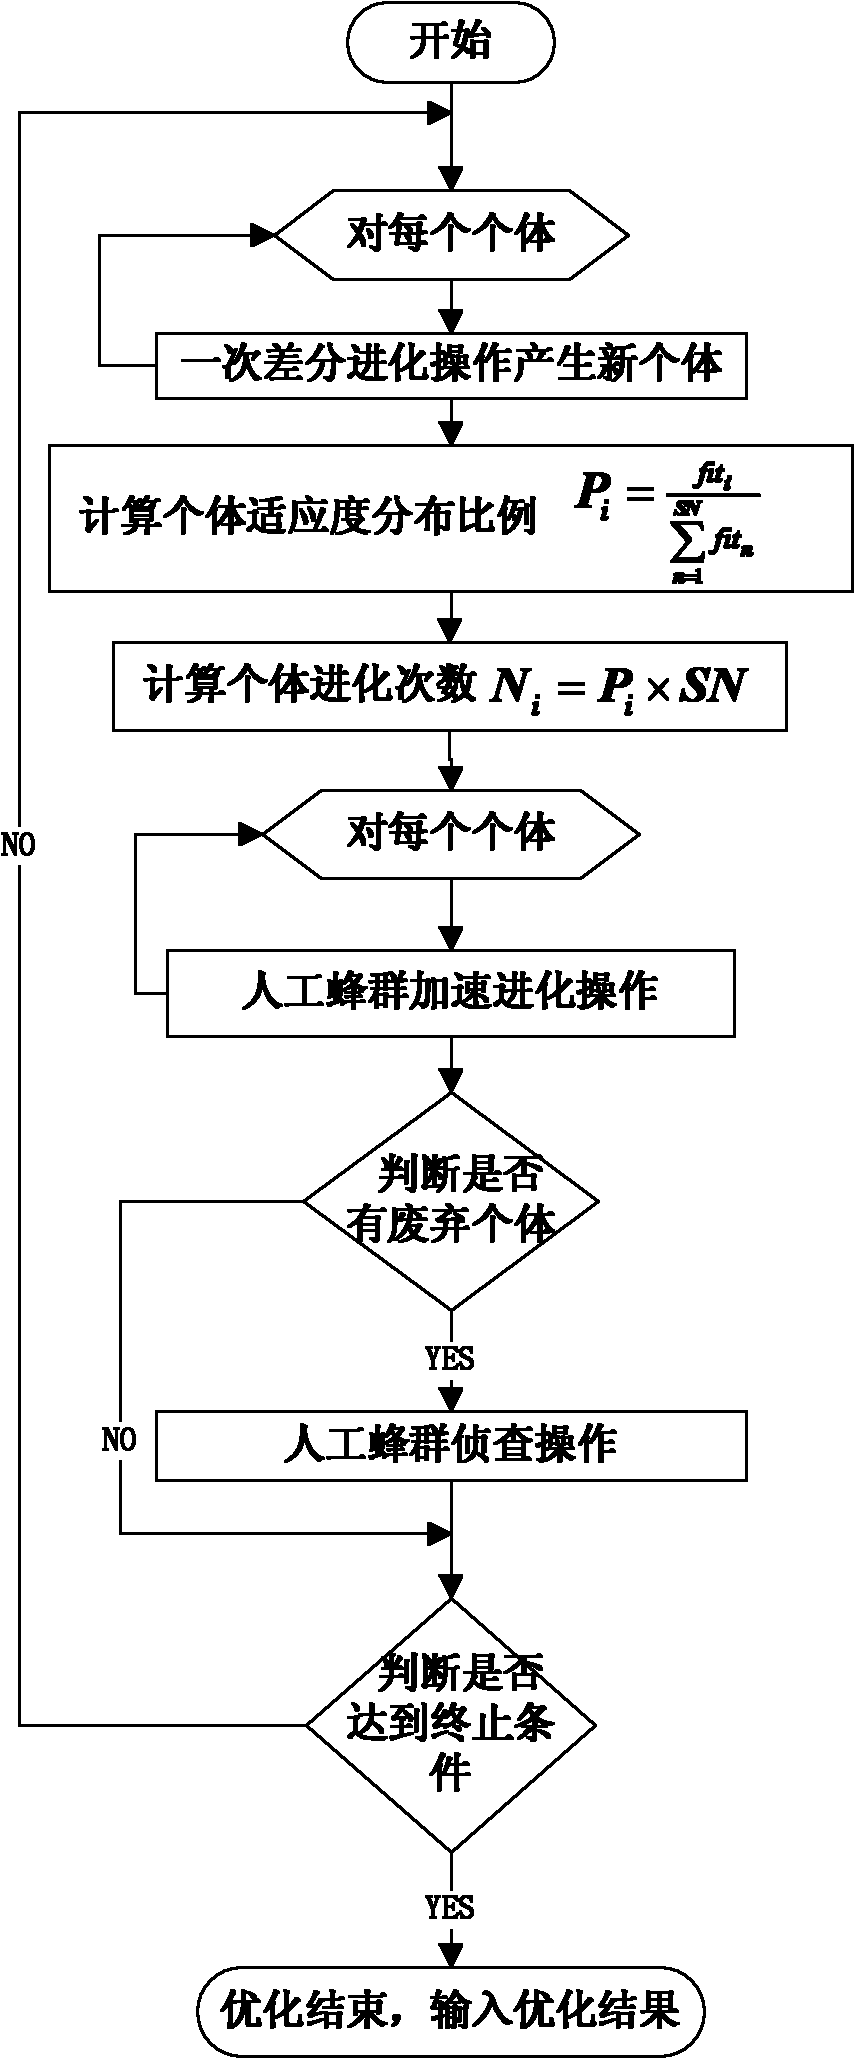 ORP (optimal reactive power) method of distribution network of electric power system